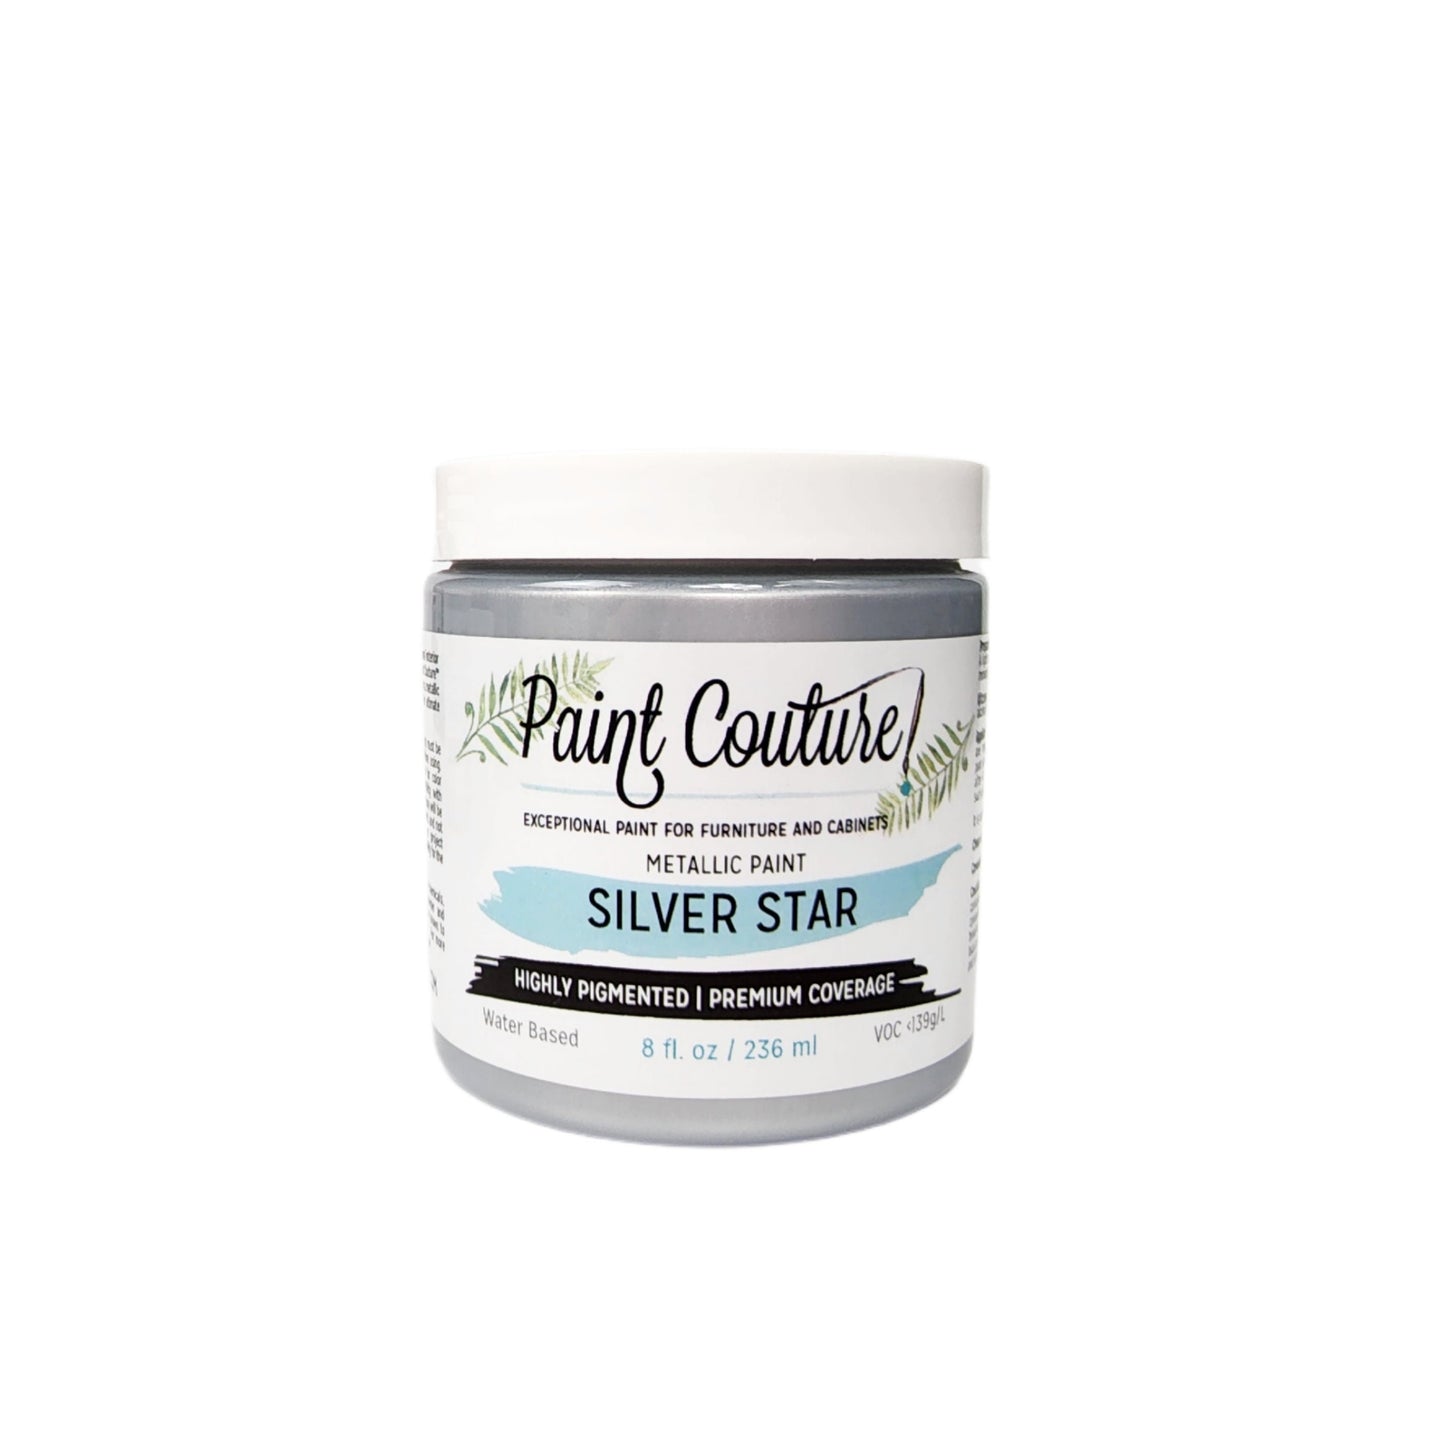 Paint Couture Metallic Paint Silver Star